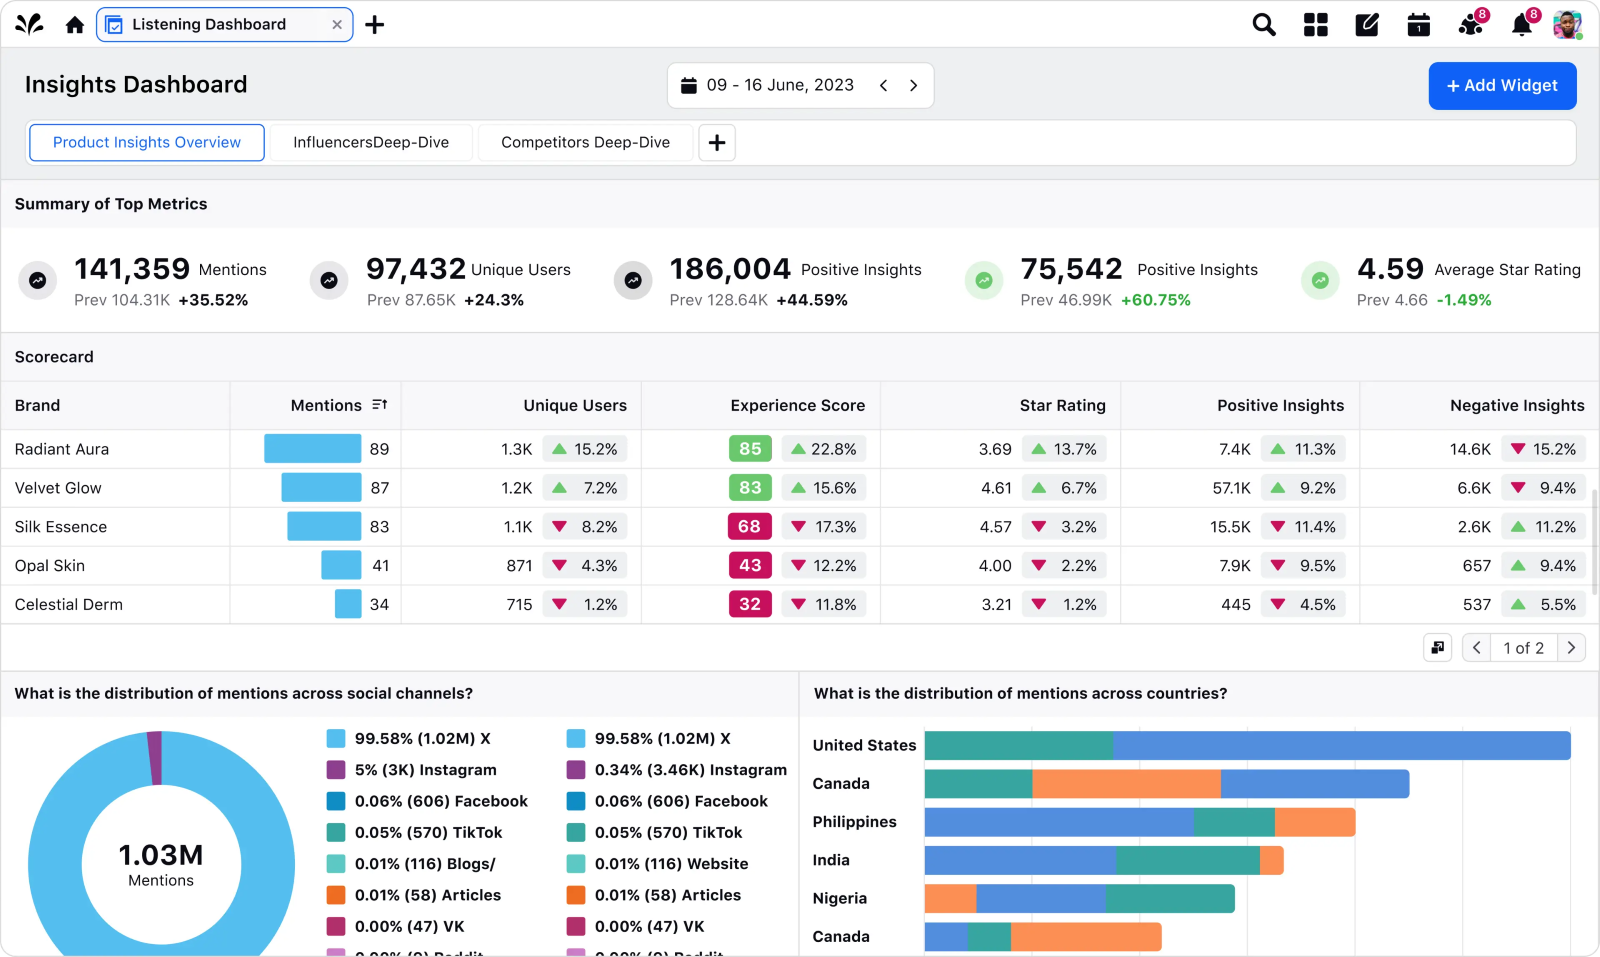 Sprinklr's listening dashboard summarizing top metrics and the distribution of mentions across social channels and countries.